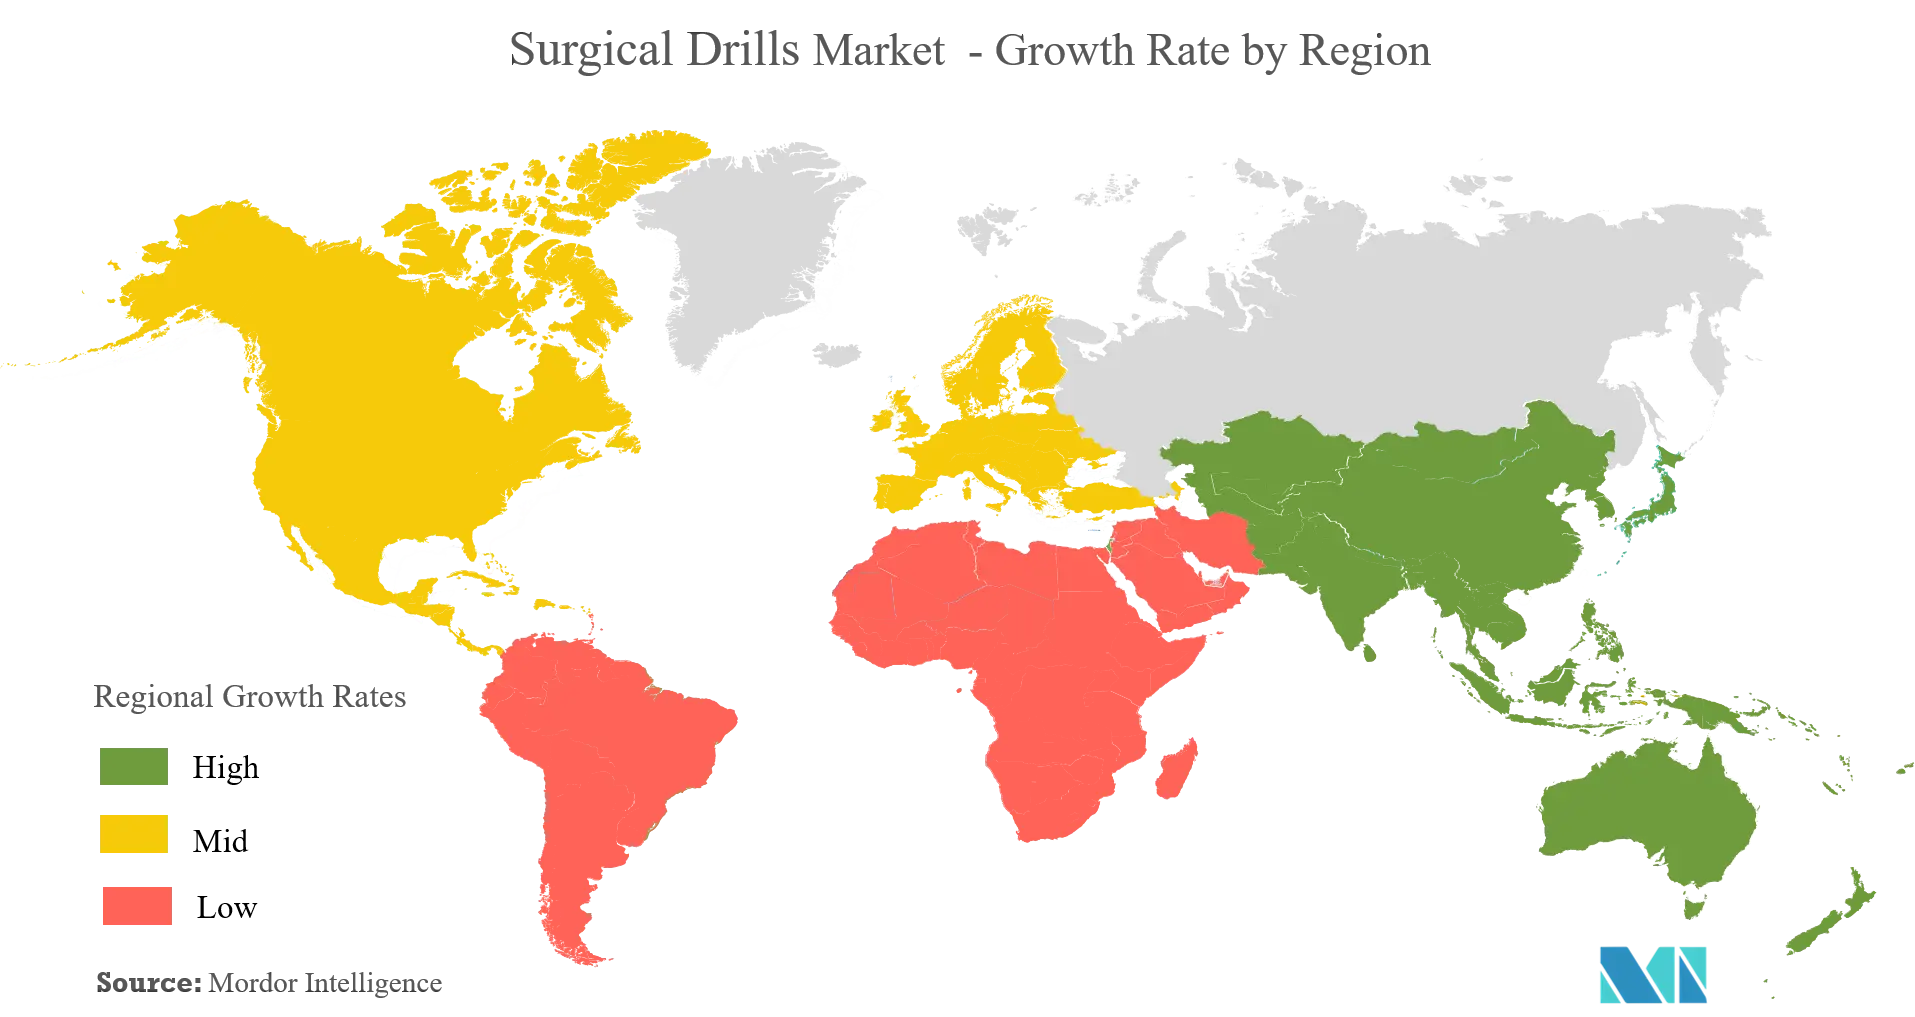 Surgical Drills Market Growth Rate